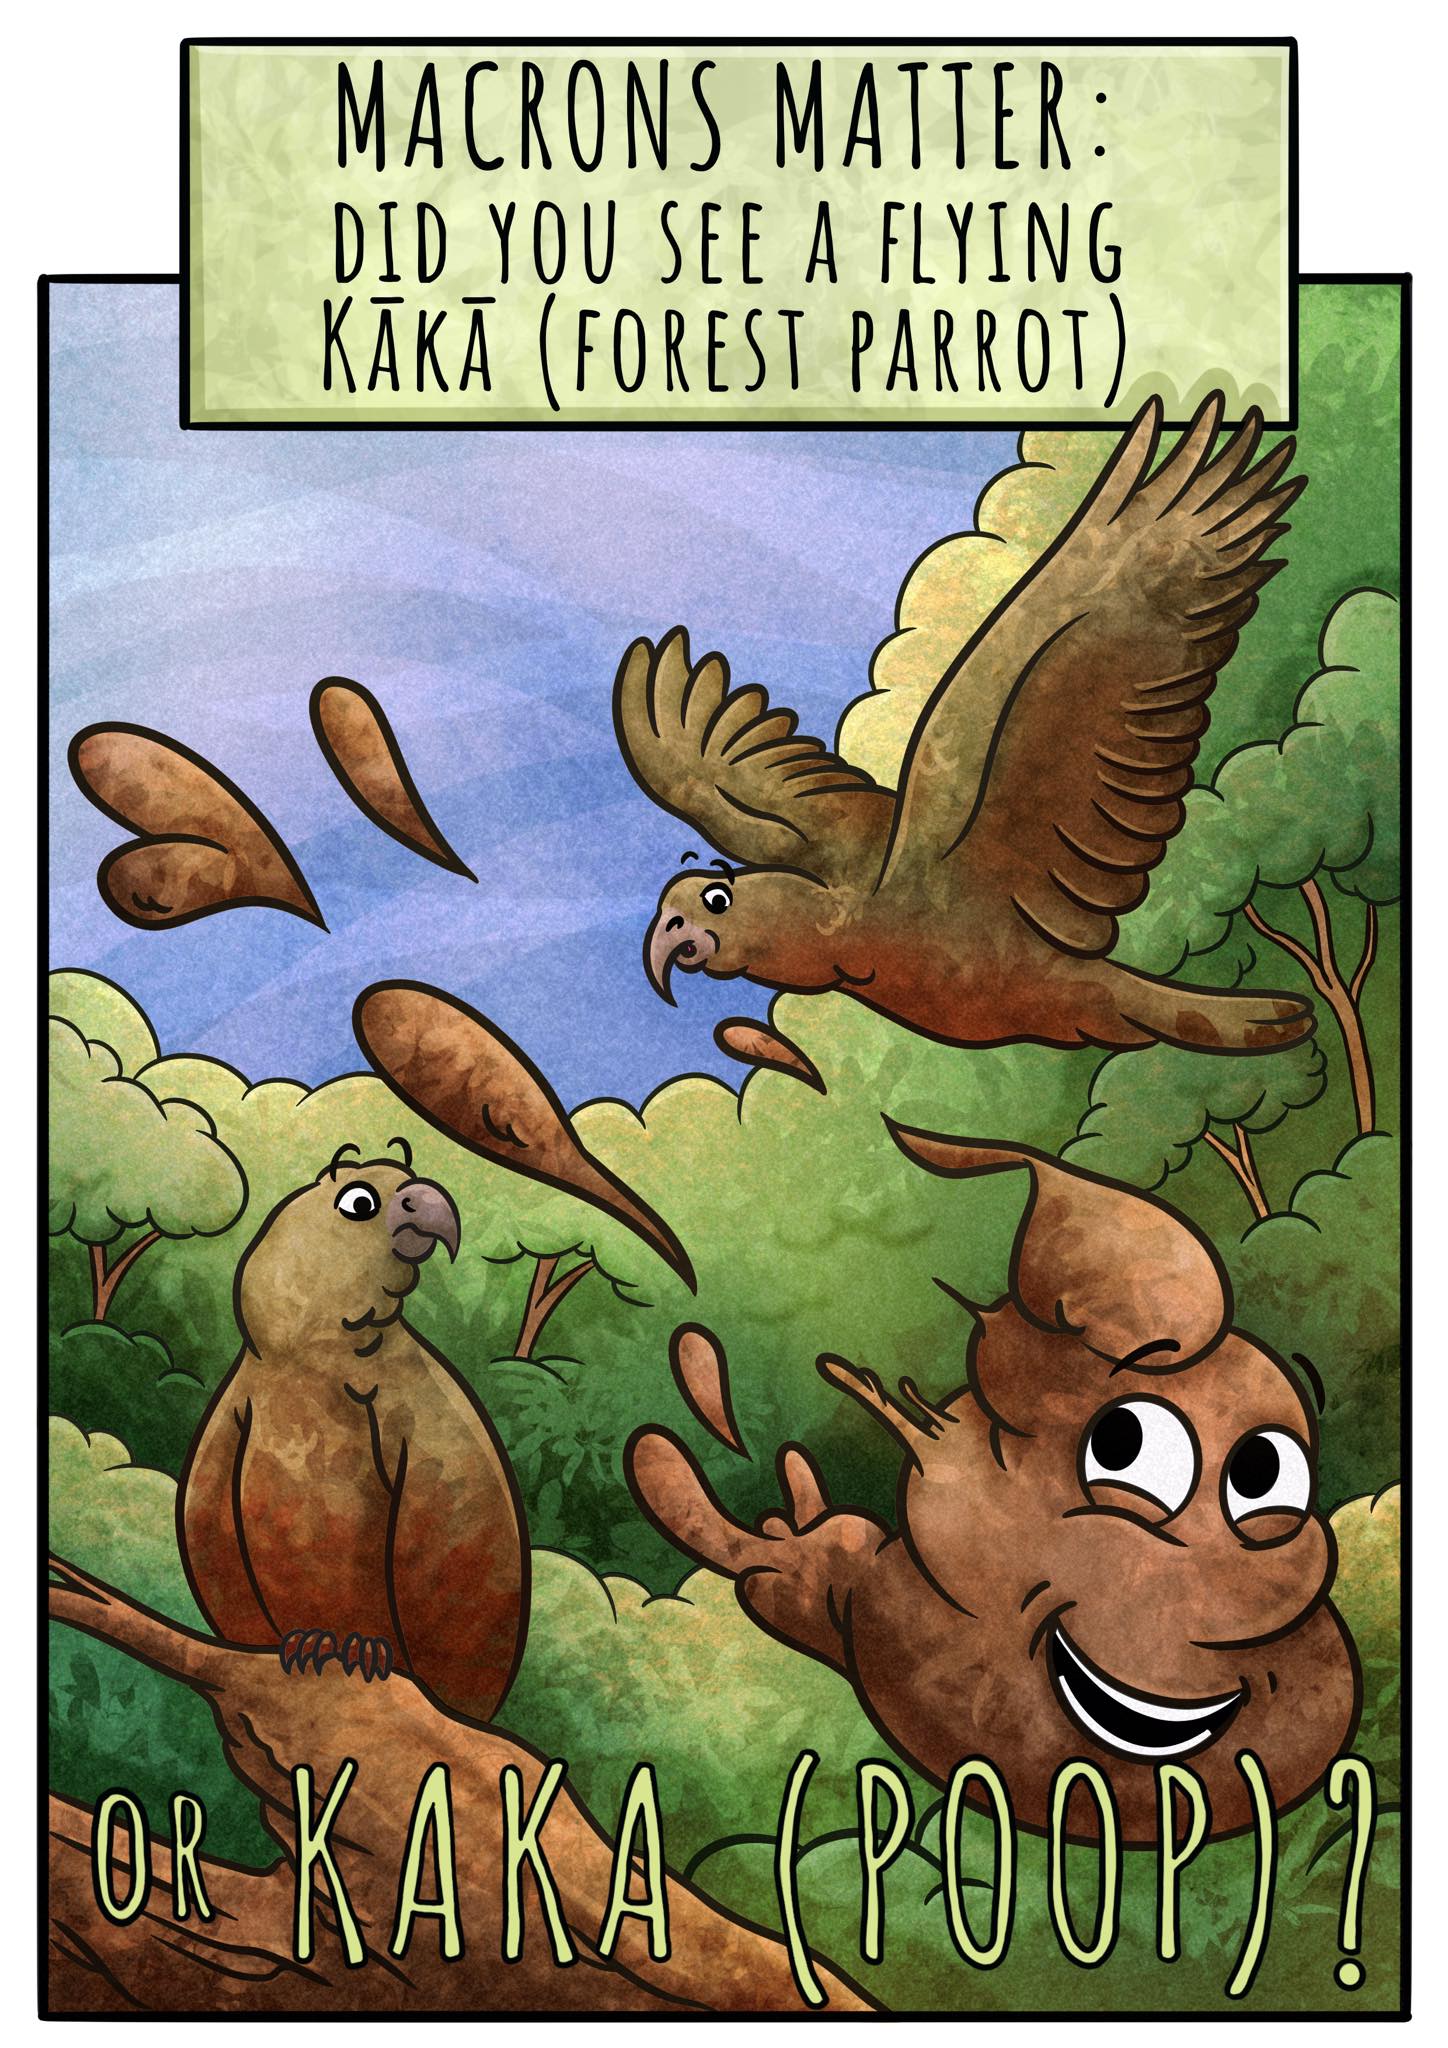 Image of a poop emoji (kaka) and a kākā bird. Accentuating the macrons being important in a word.